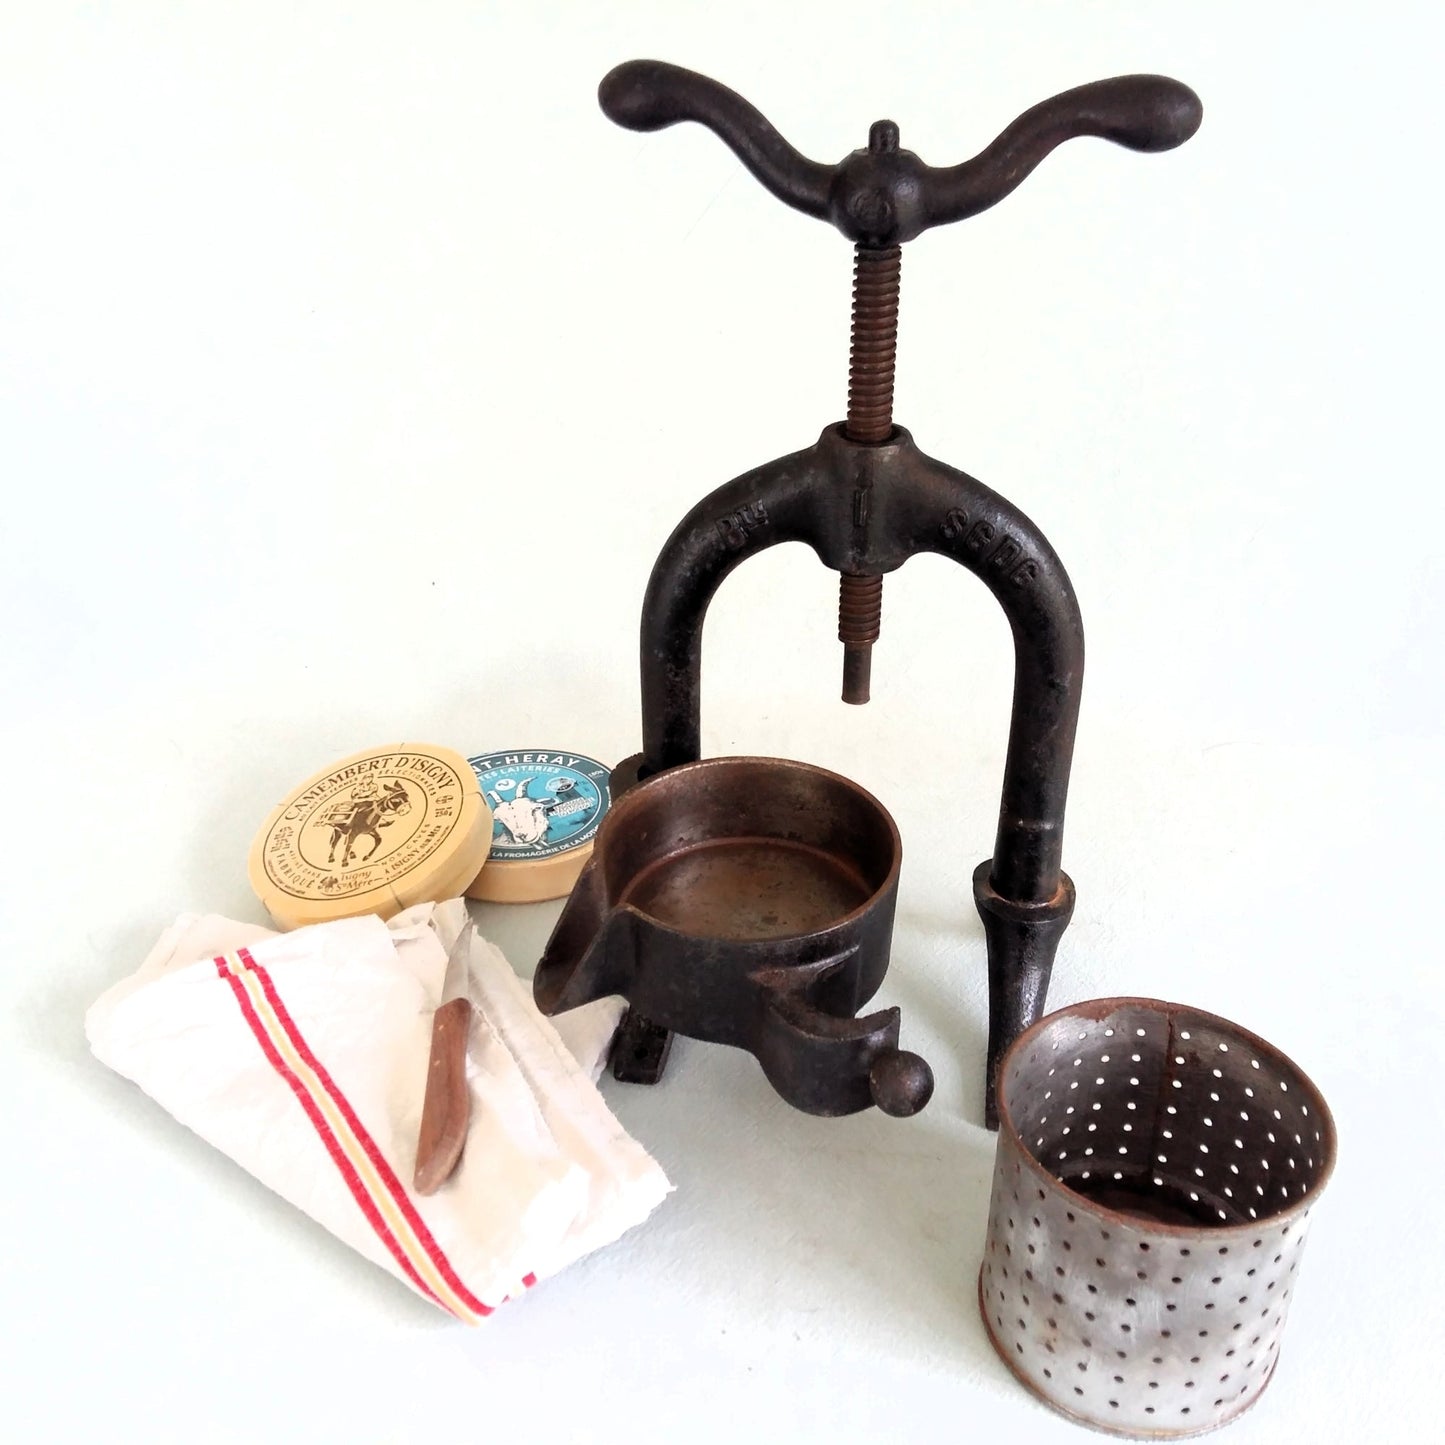 Antique French Cheese/Fruit Press by Tiggy and Pip. Only 345€ with FREE shipping.